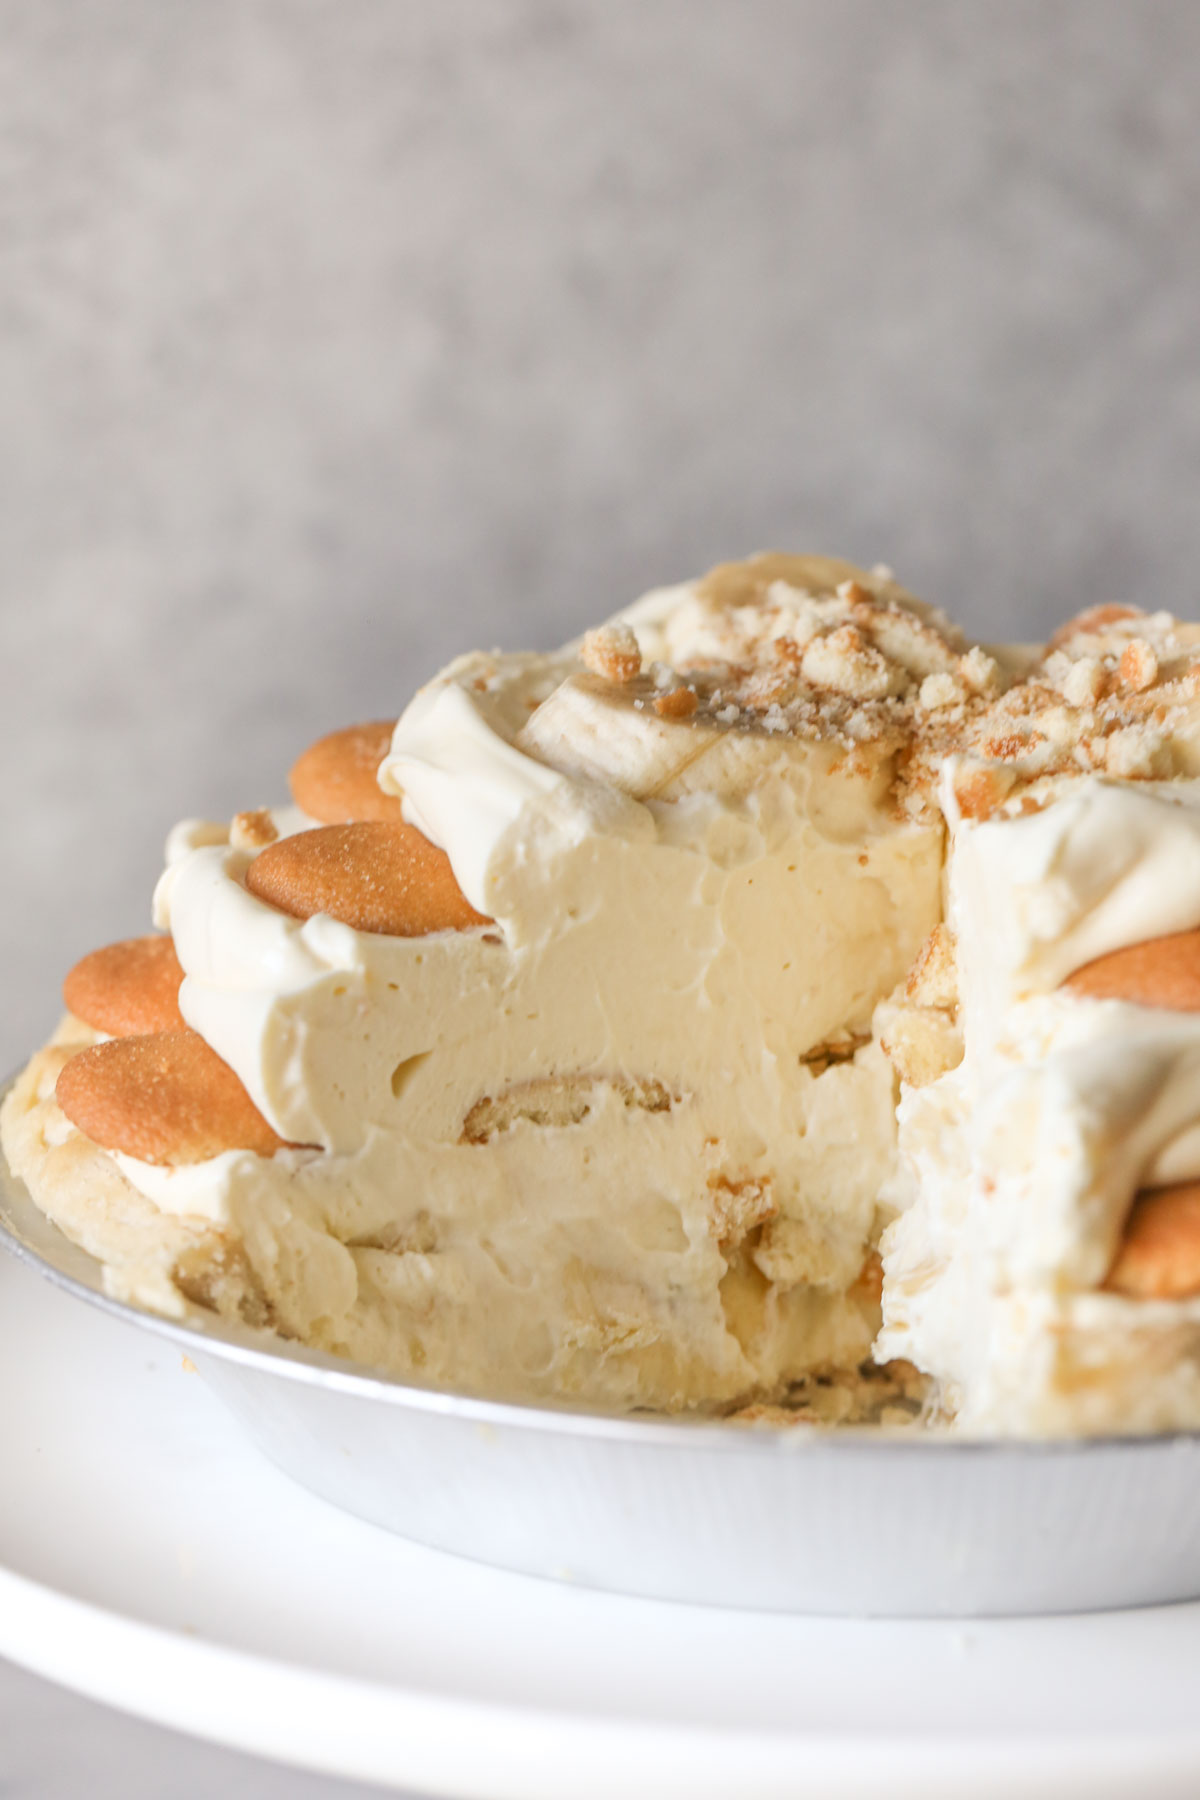 Close up shot of Mile High Banana Pudding Pie with a slice cut out, showing the inside layers of the pie.  